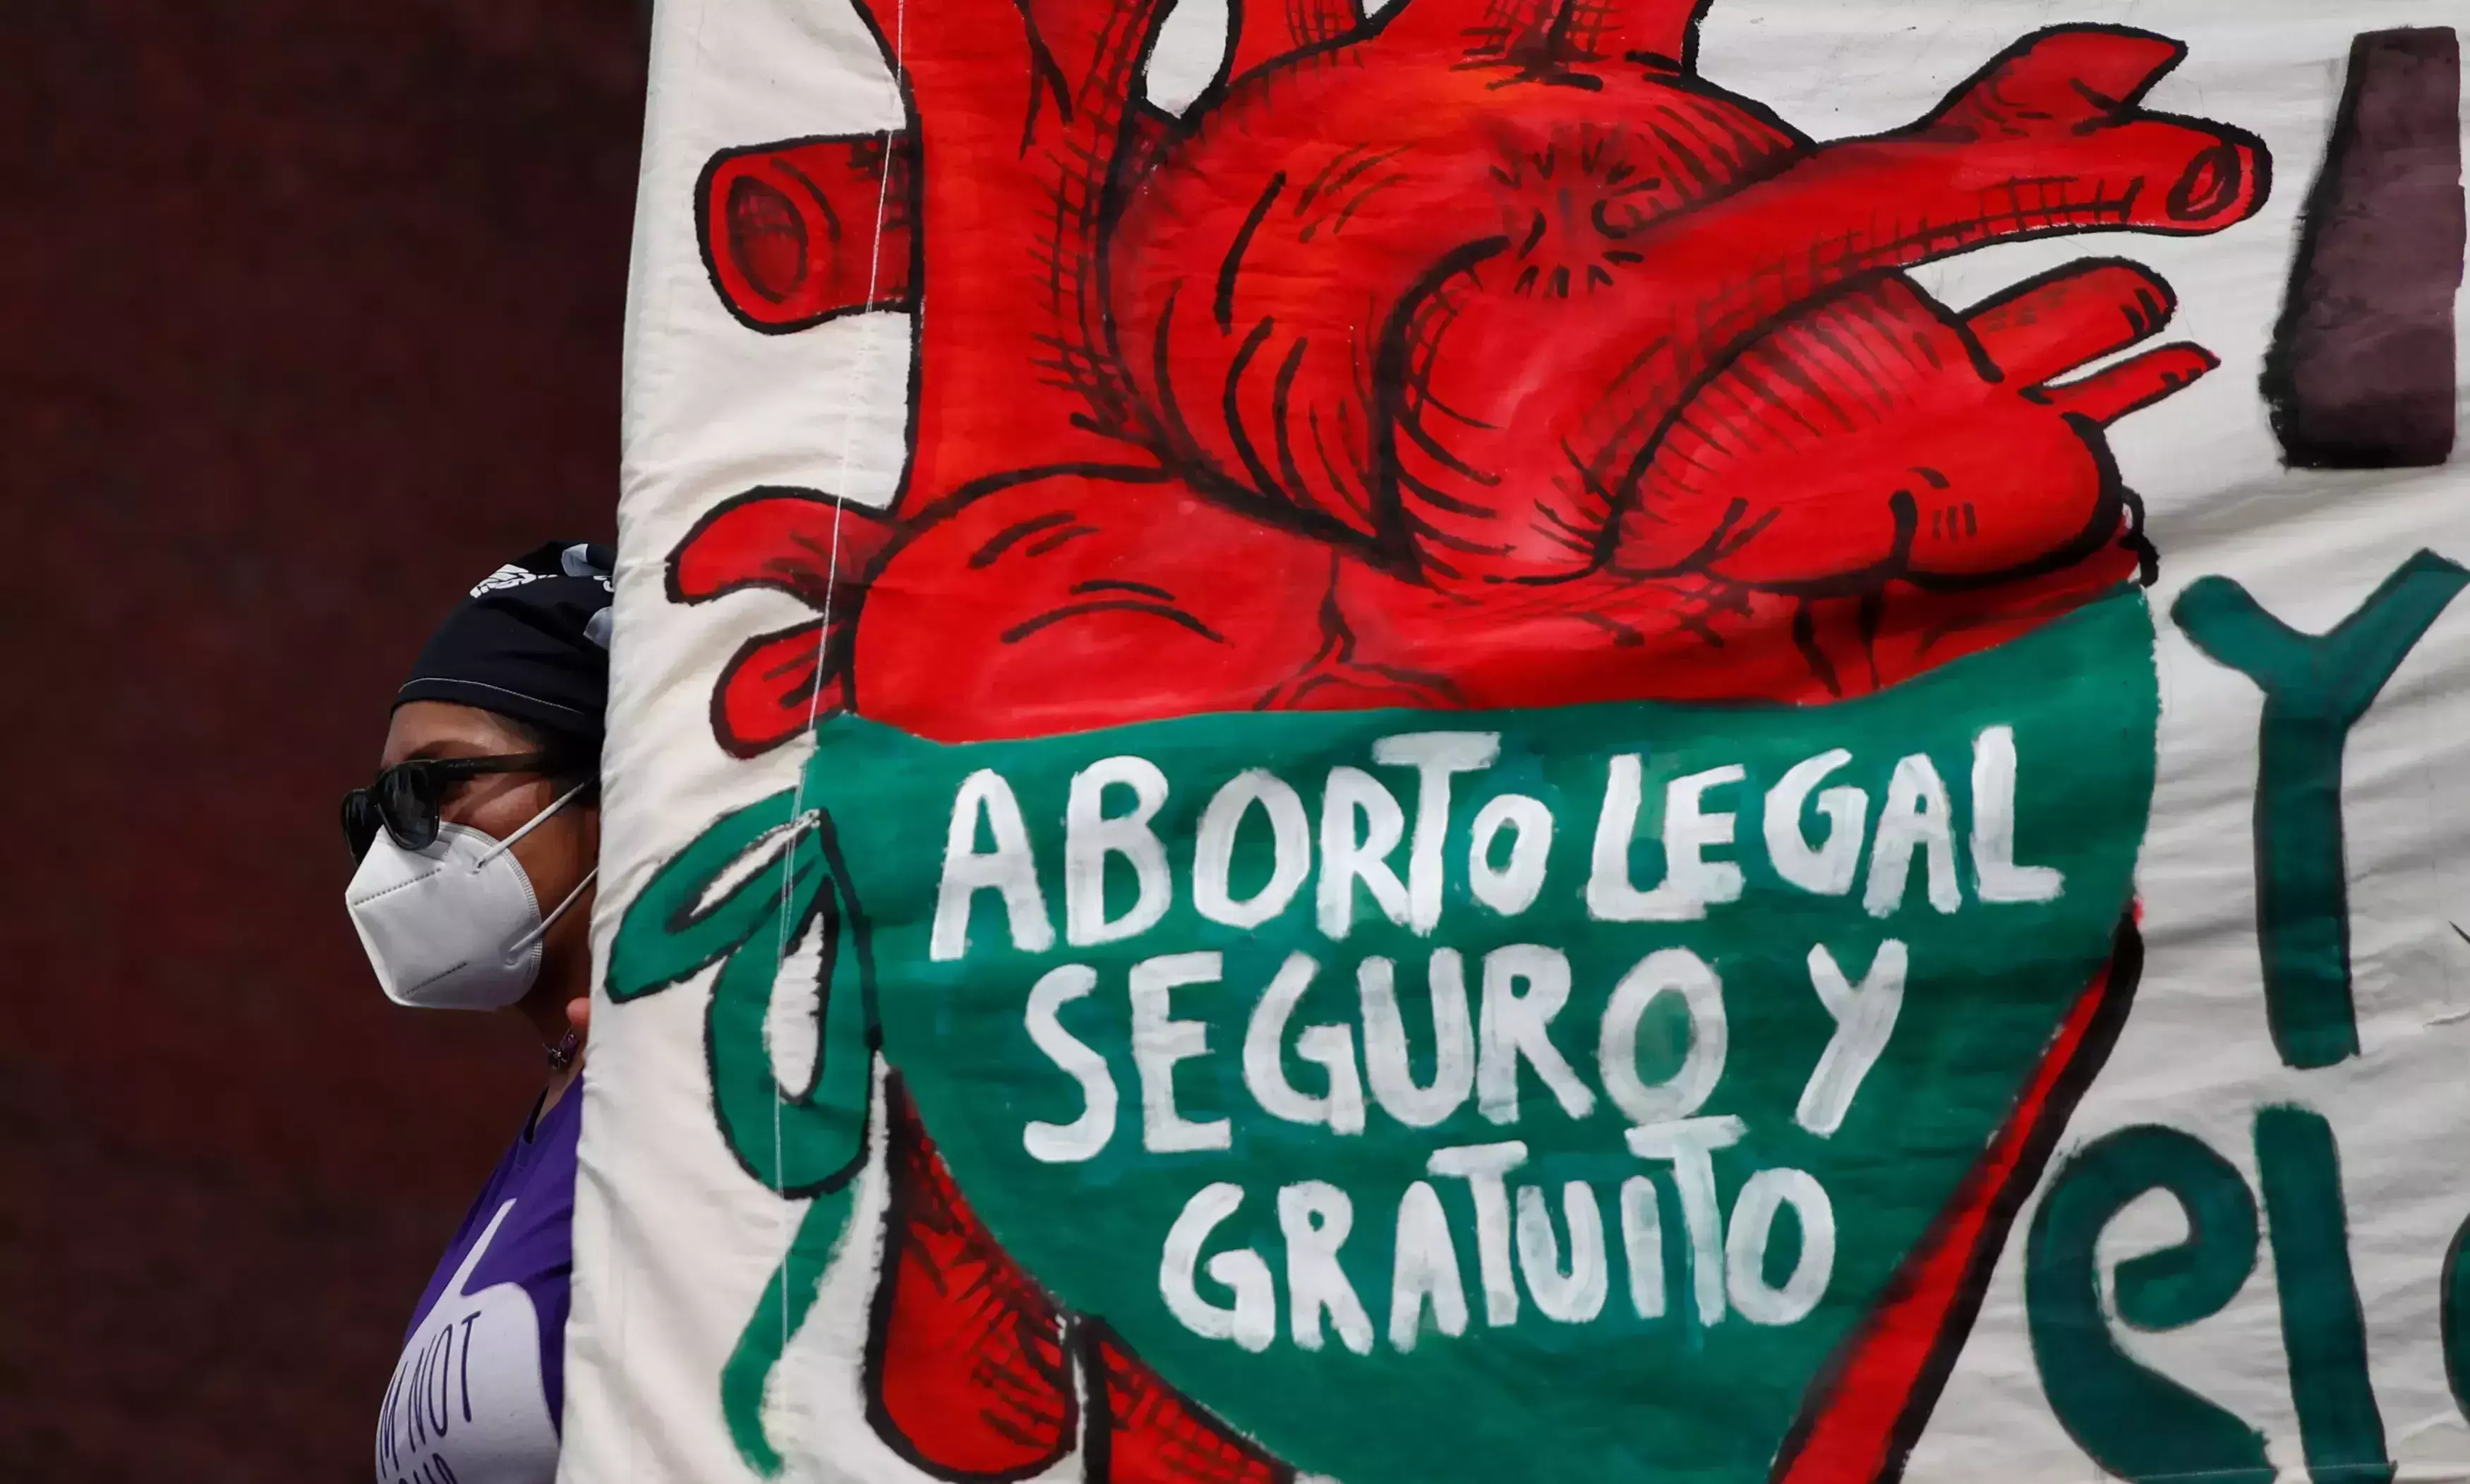 Abortion legal in Mexico for minors